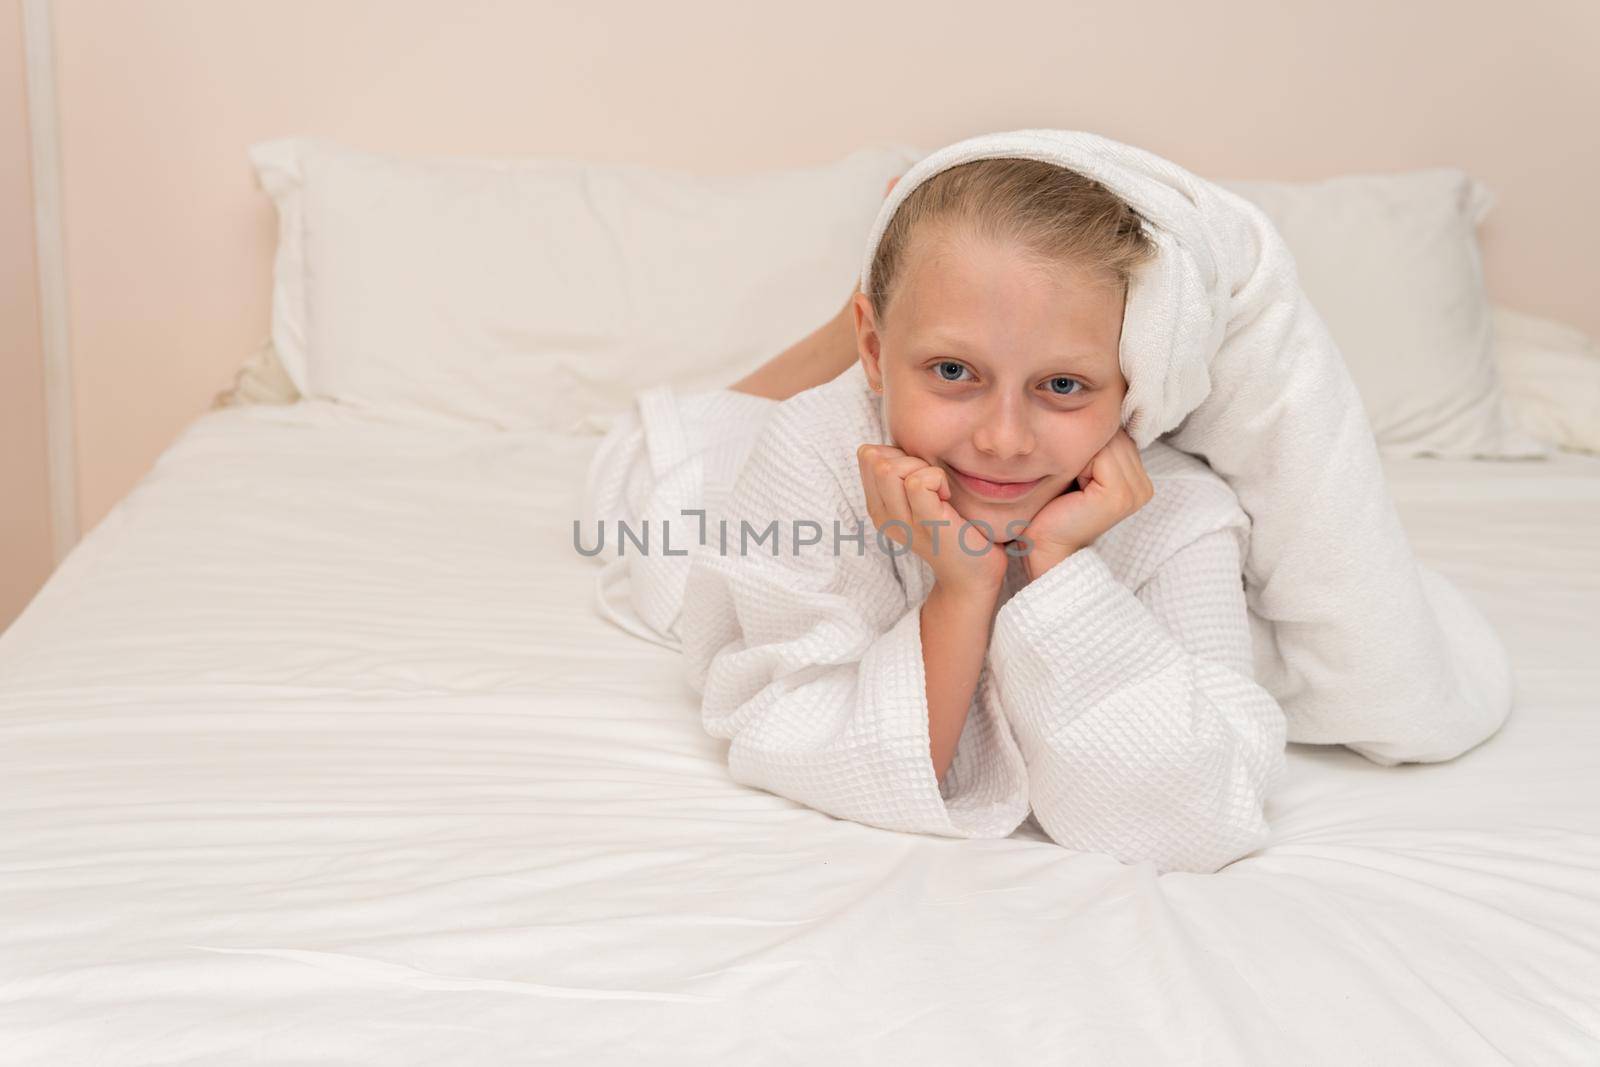 Elbows bathrobe copyspace smile Creek coffee bed girl white morning, concept woman hotel for shower and beautiful style, little bathing. Hair funny fashion,